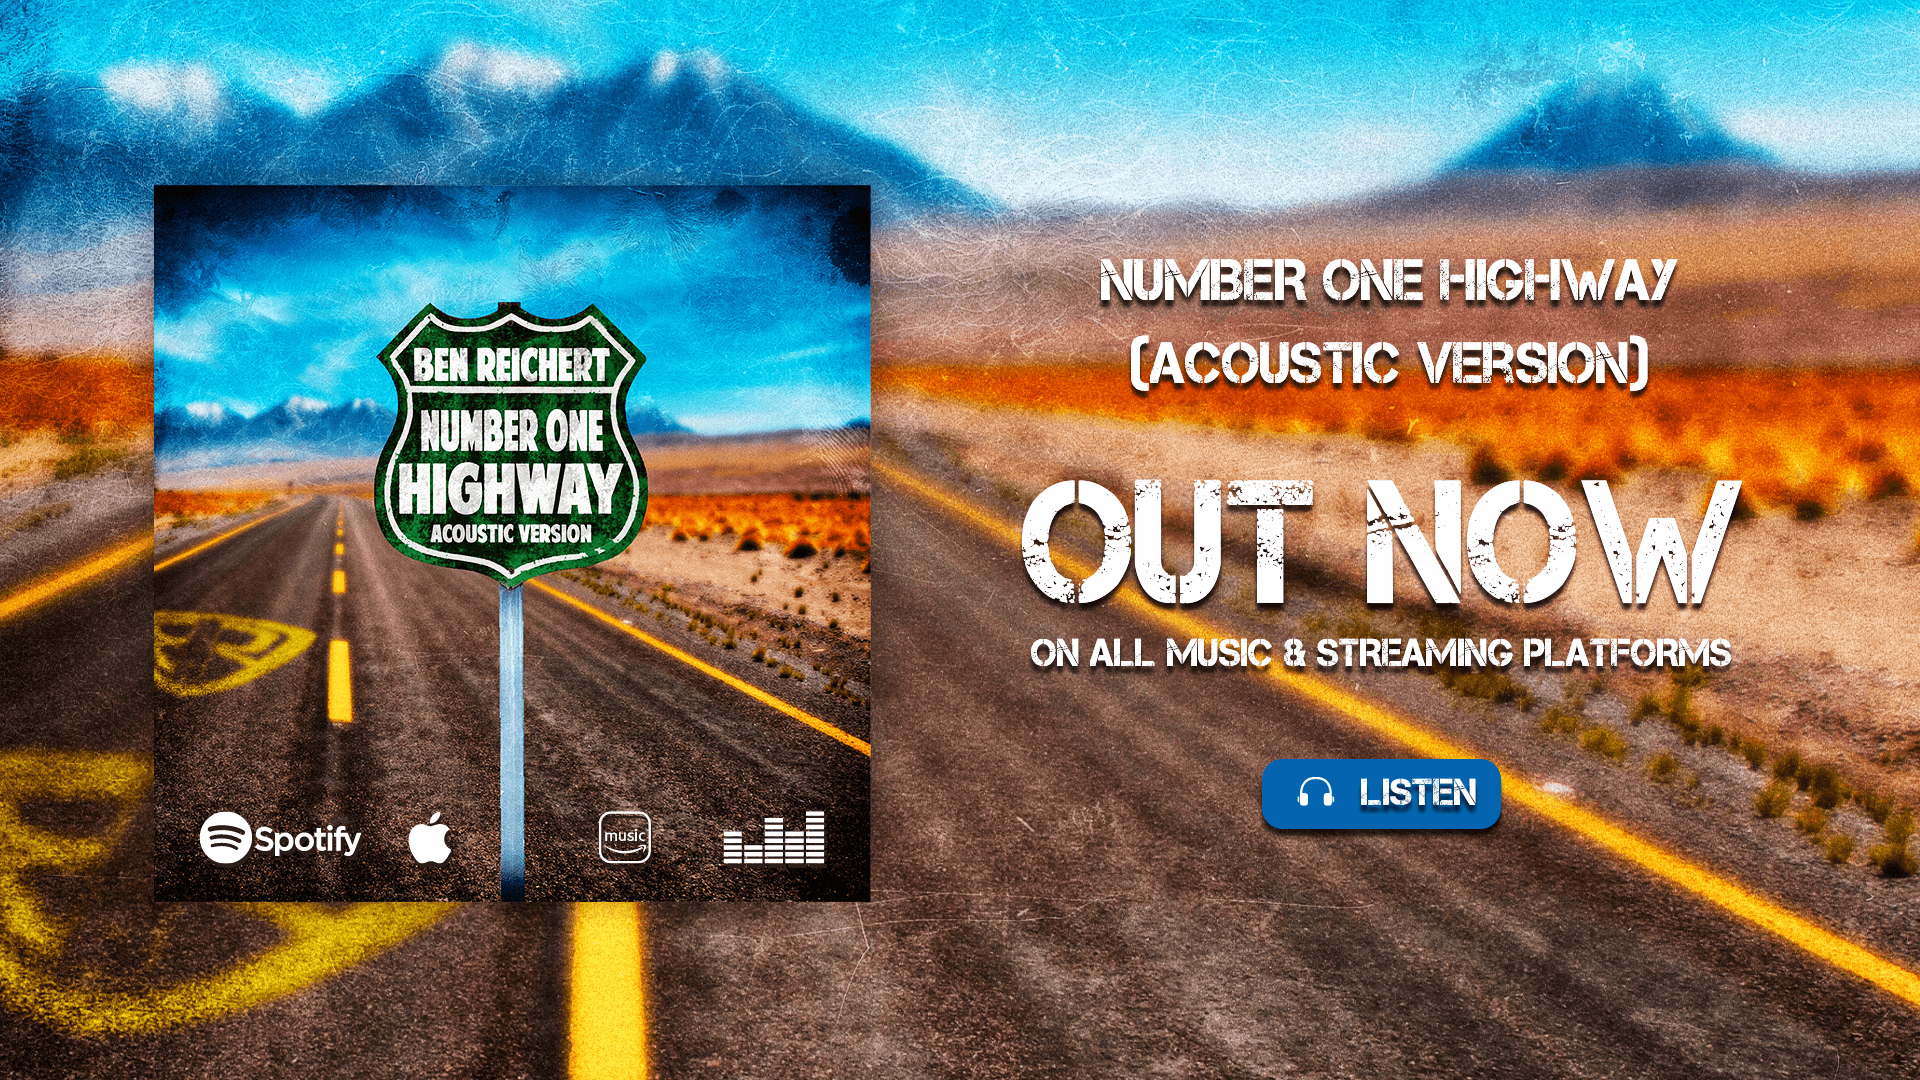 Number One Highway (Acoustic Version) OUT NOW